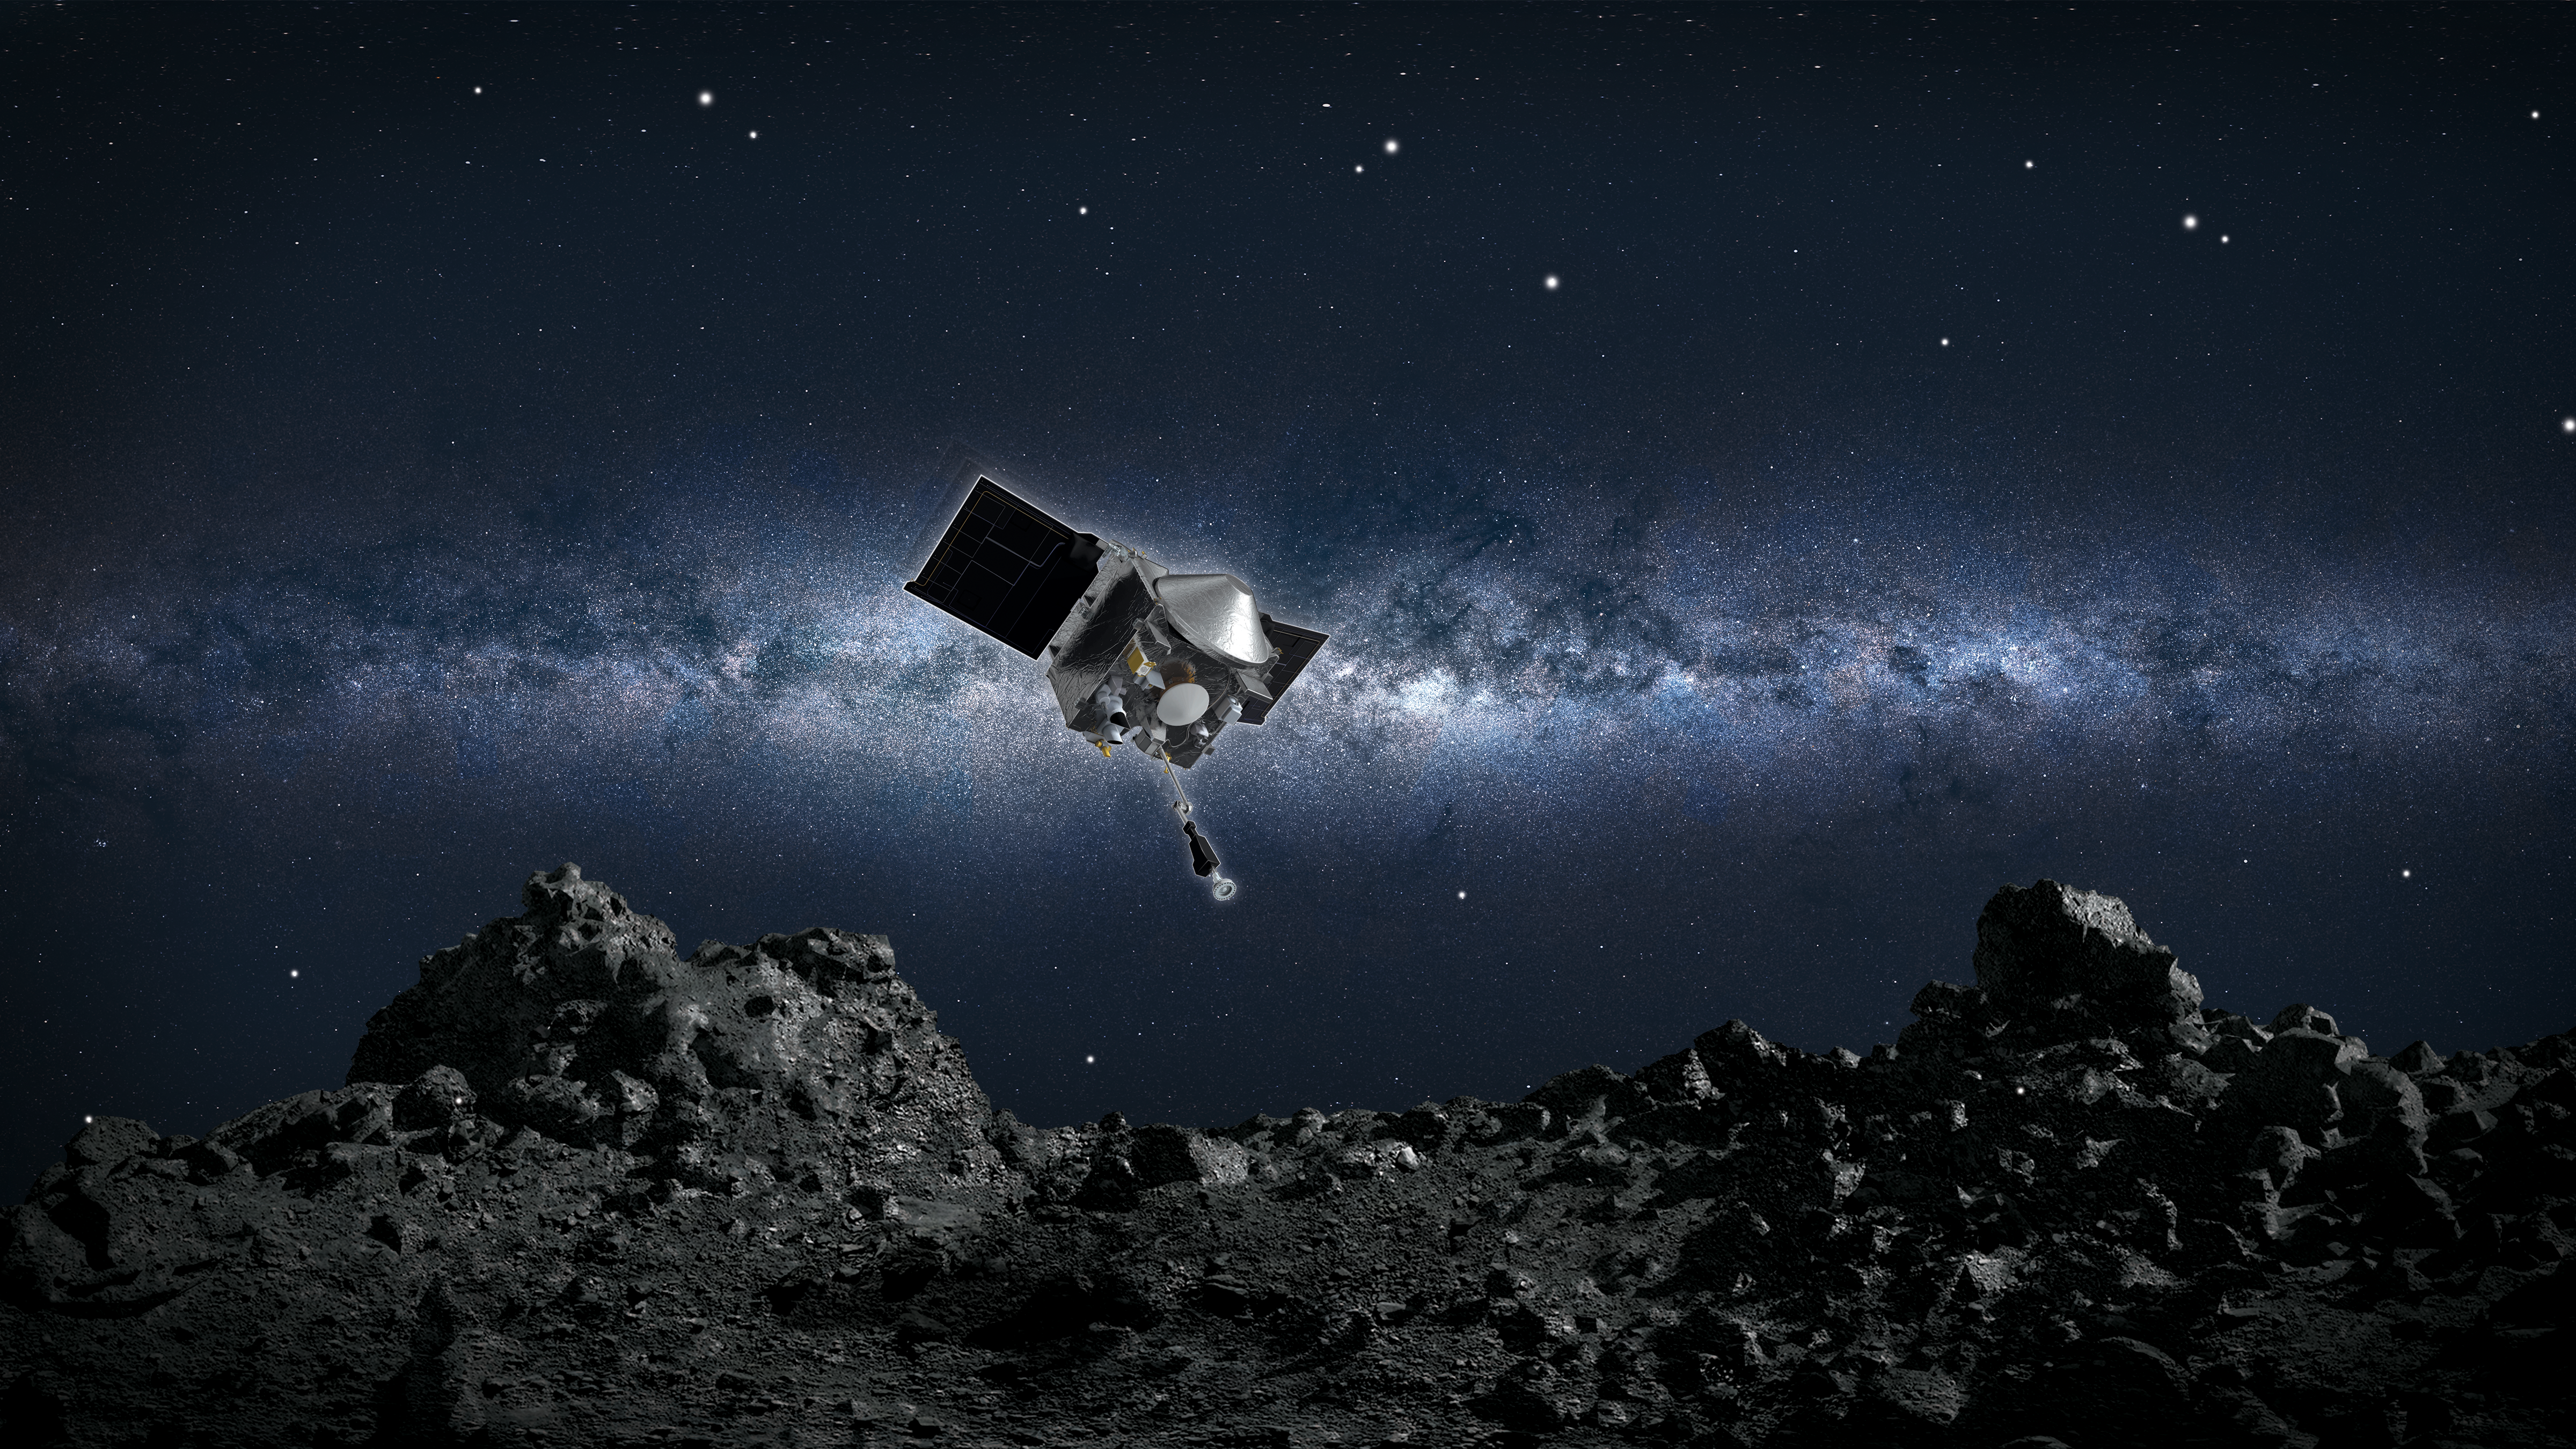 <b>Figure 2.</b> Artist’s conception of the OSIRIS-REx spacecraft descending to the surface of Bennu, with its sampling arm extended for touchdown. (Credit: NASA/Goddard/University of Arizona)